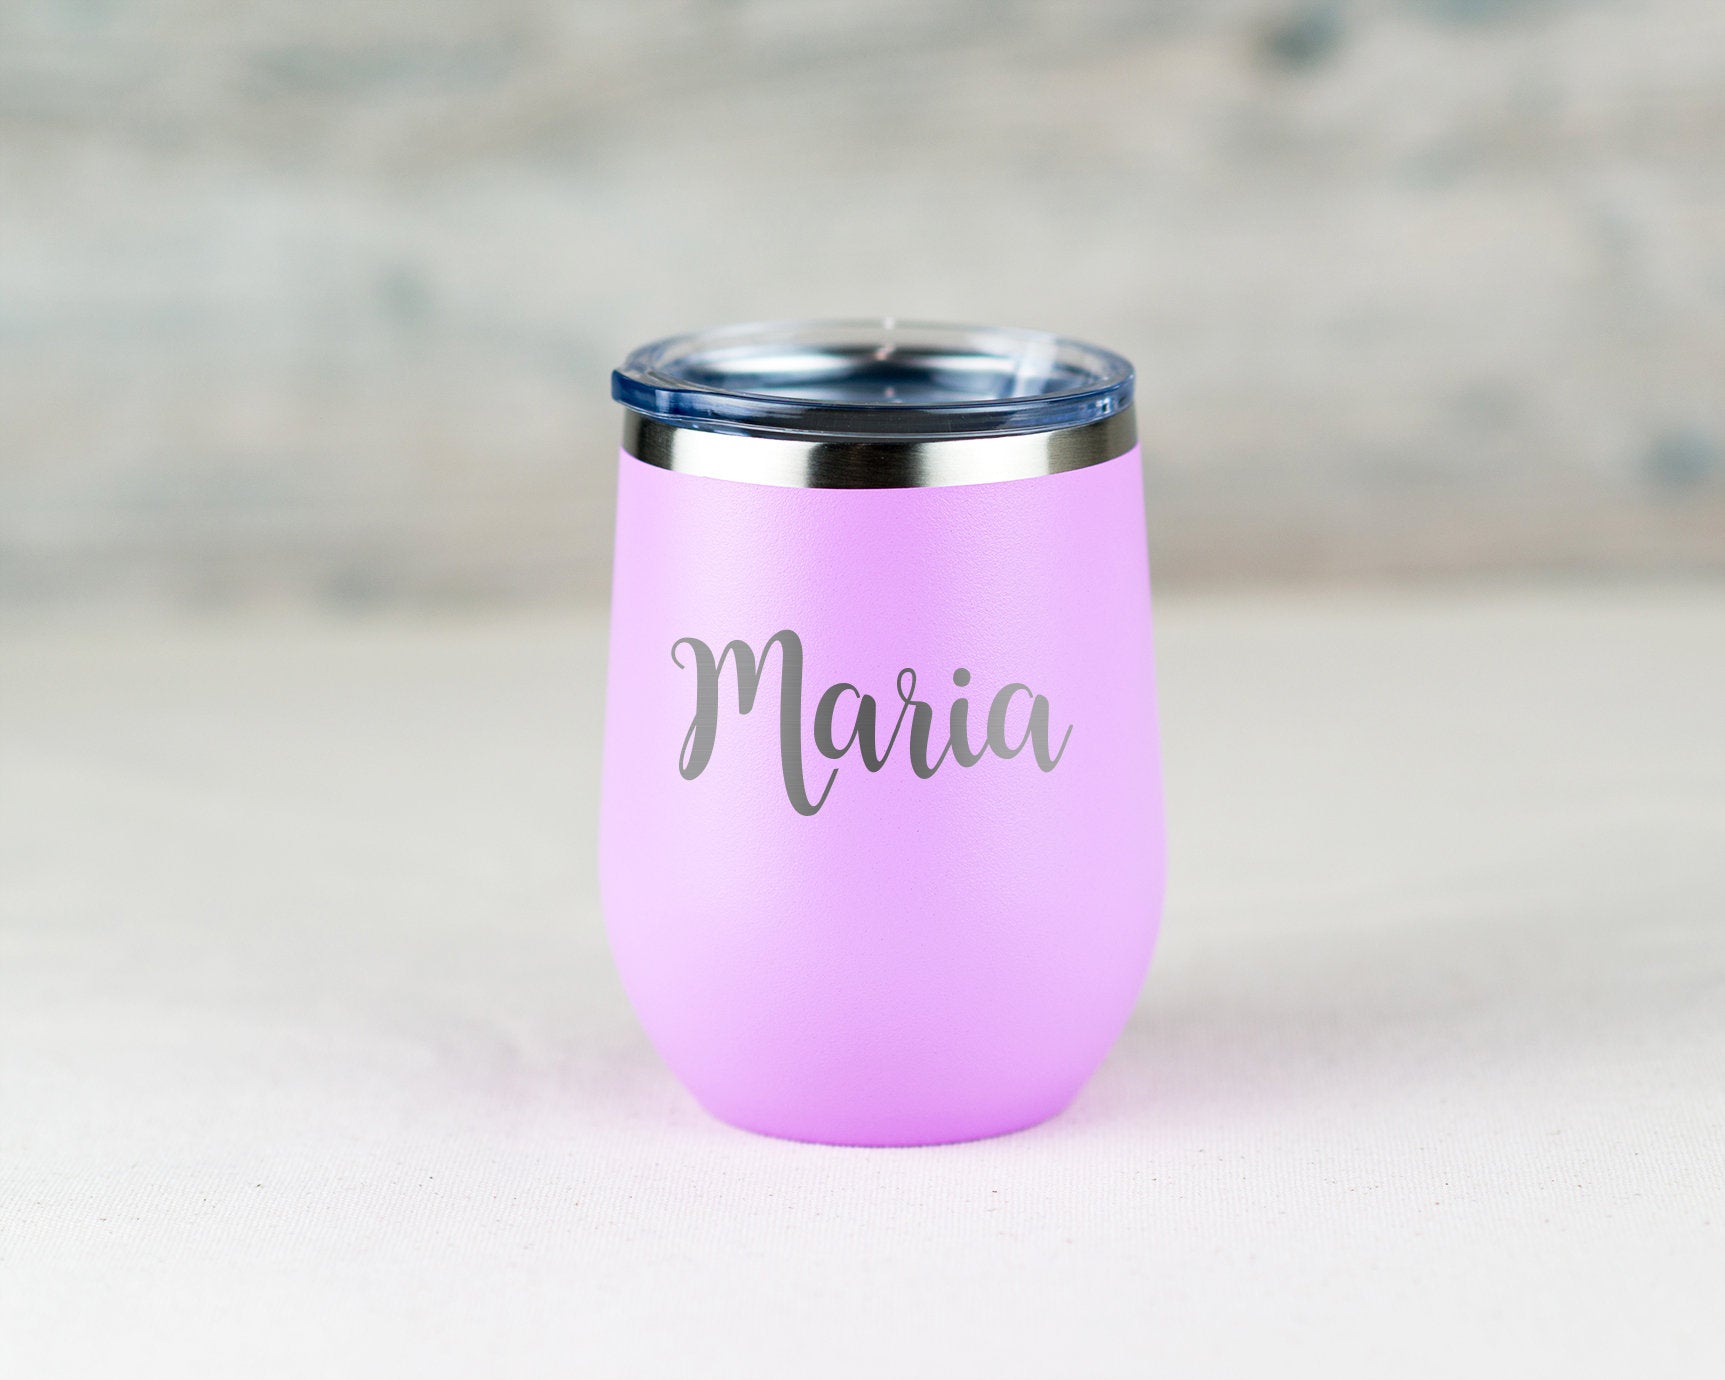 Mom's Sippy Cup Personalized Stainless Insulated Wine Cup